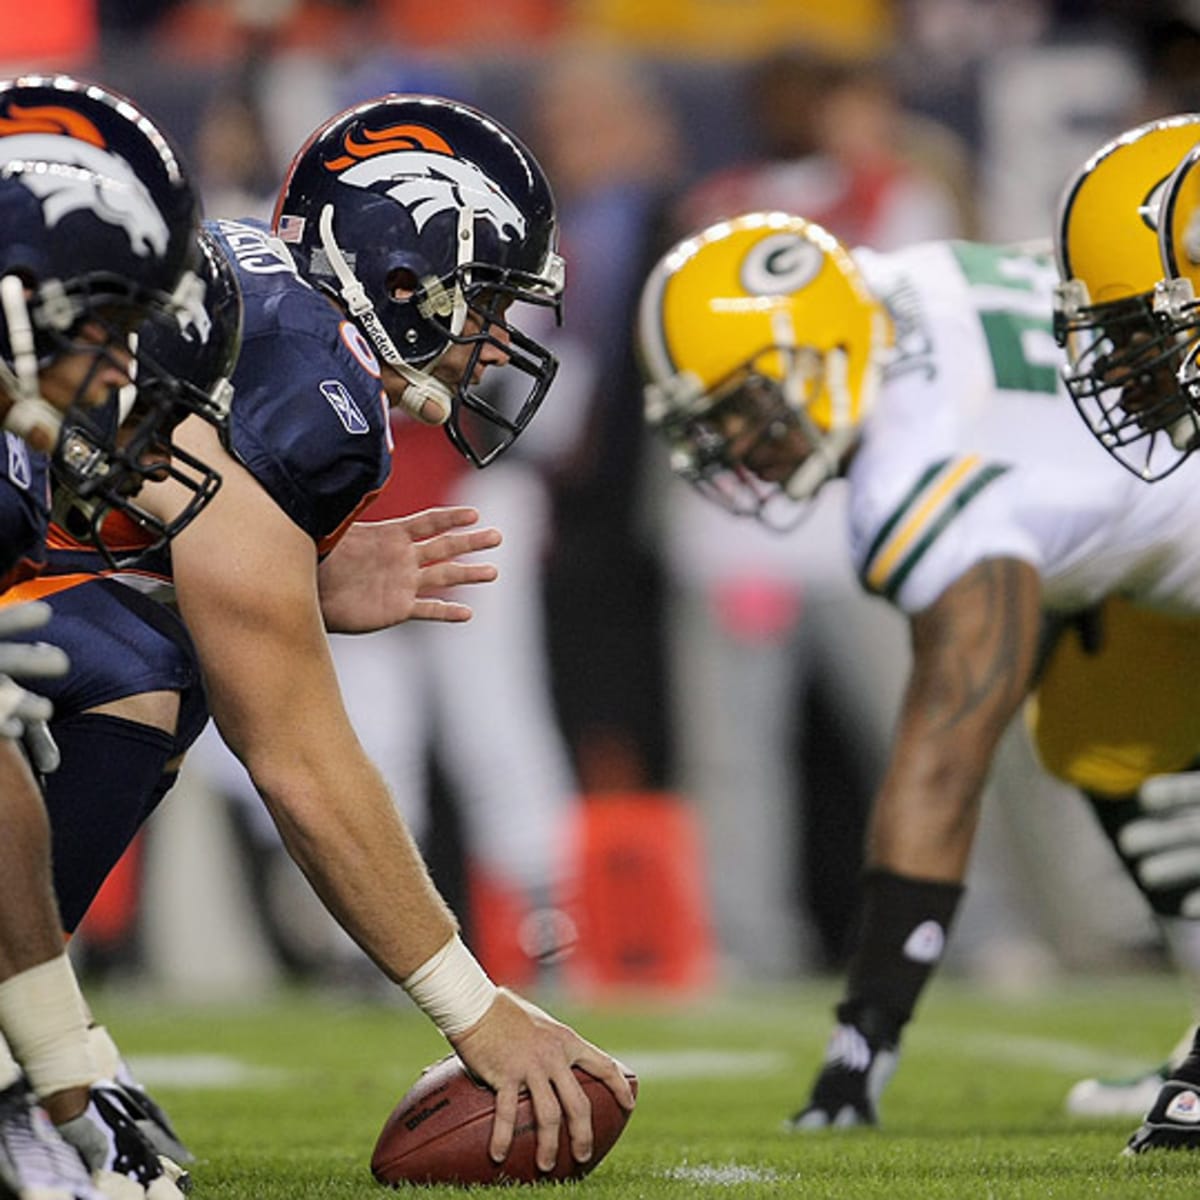 Bears, Broncos meet in a matchup of winless and reeling teams